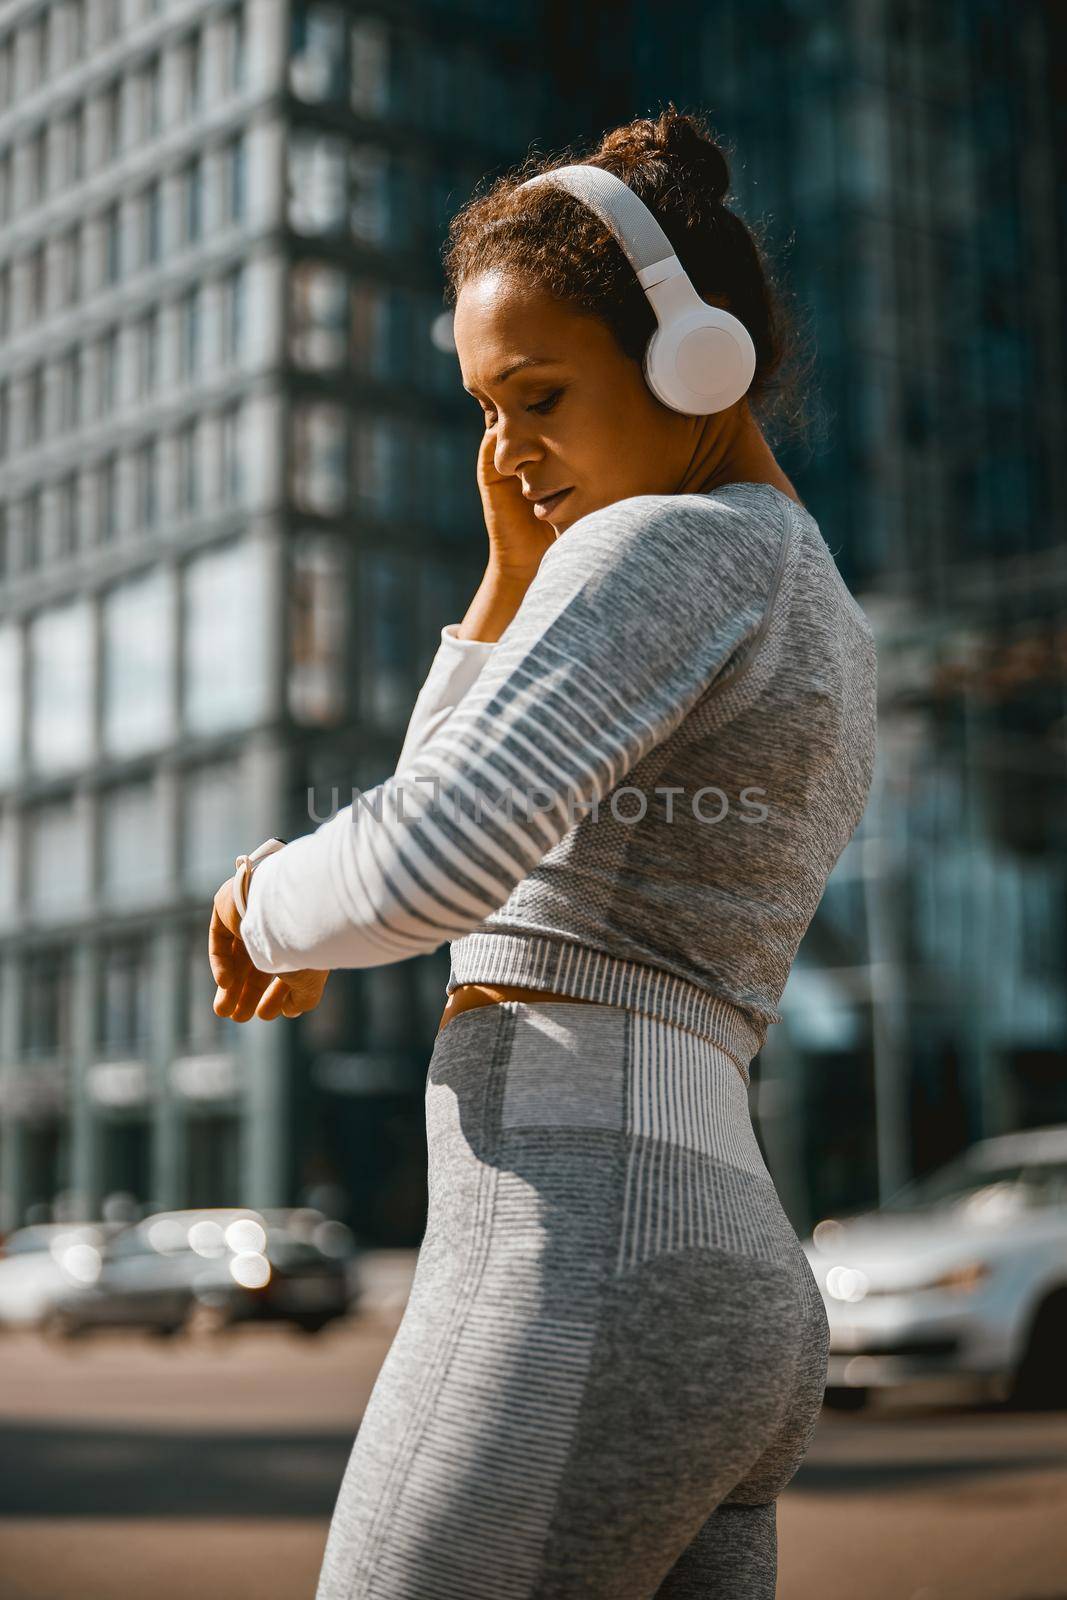 Fit woman in headphones and sportswear standing on an urban street. Sports concept